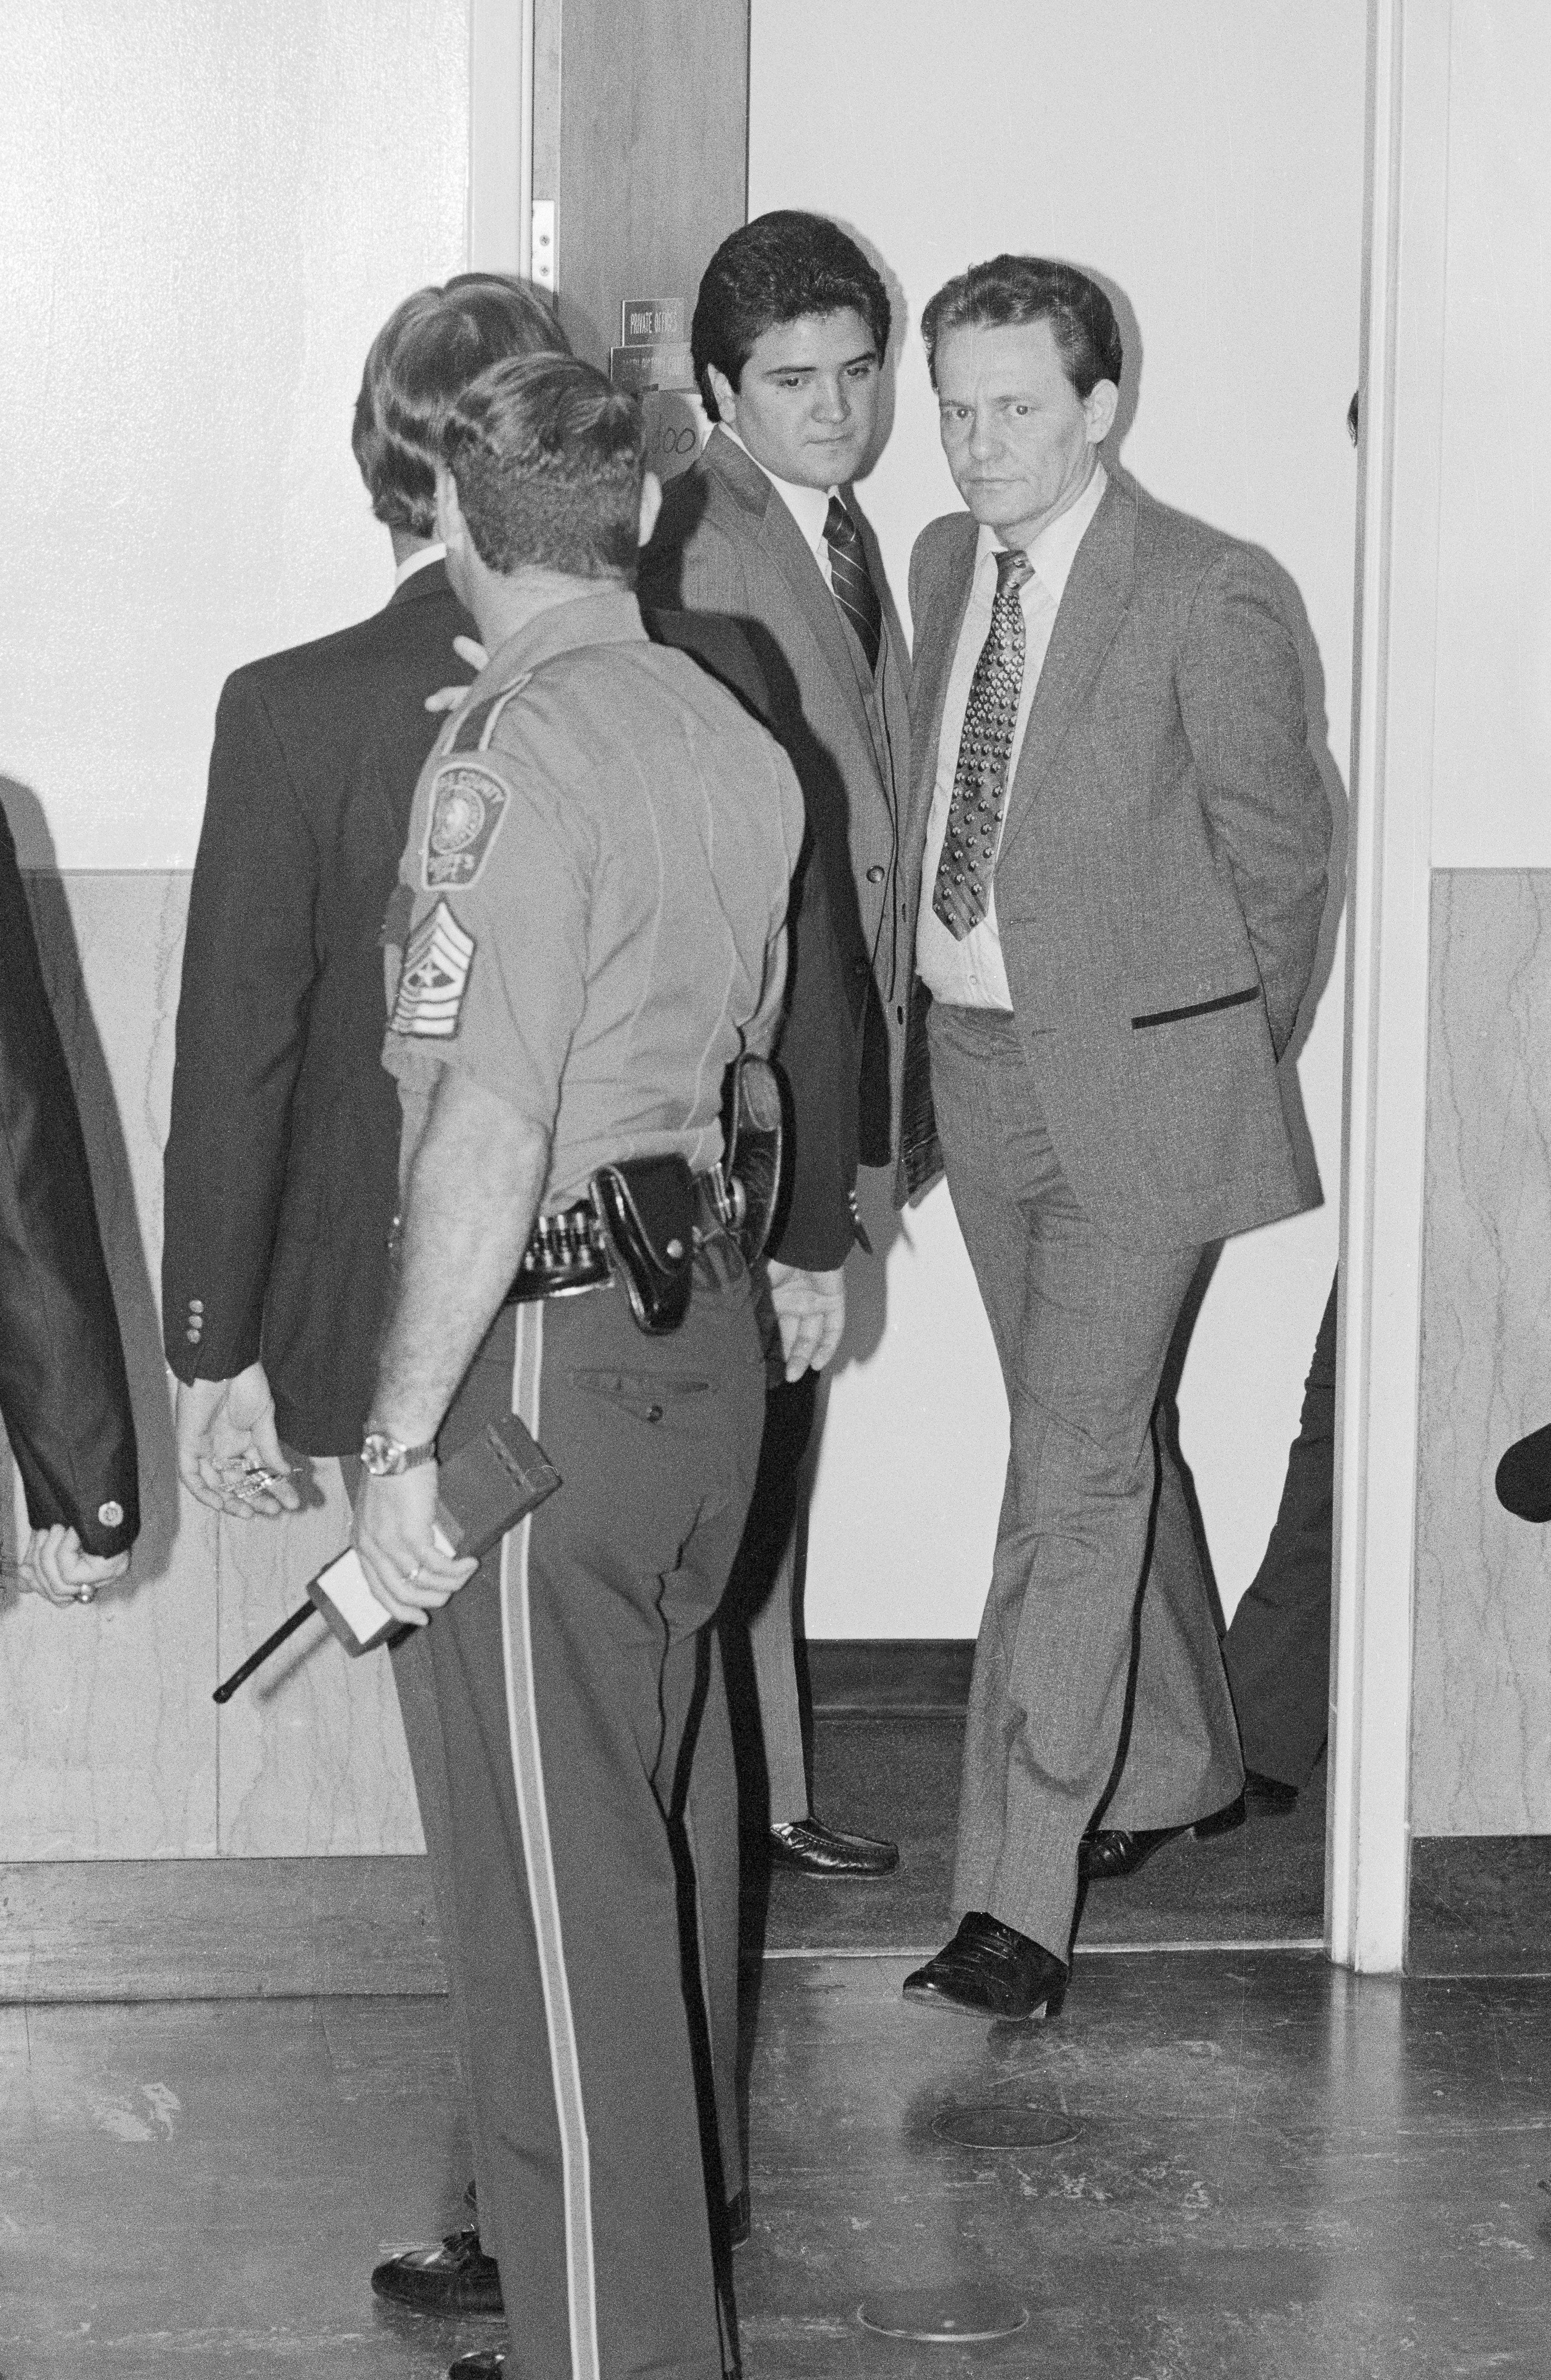 Charles Harrelson, convicted hitman and prime suspect in Judge John Wood's 1979 assassination, sentenced to 20 years for firearm possession | Source: Getty Images